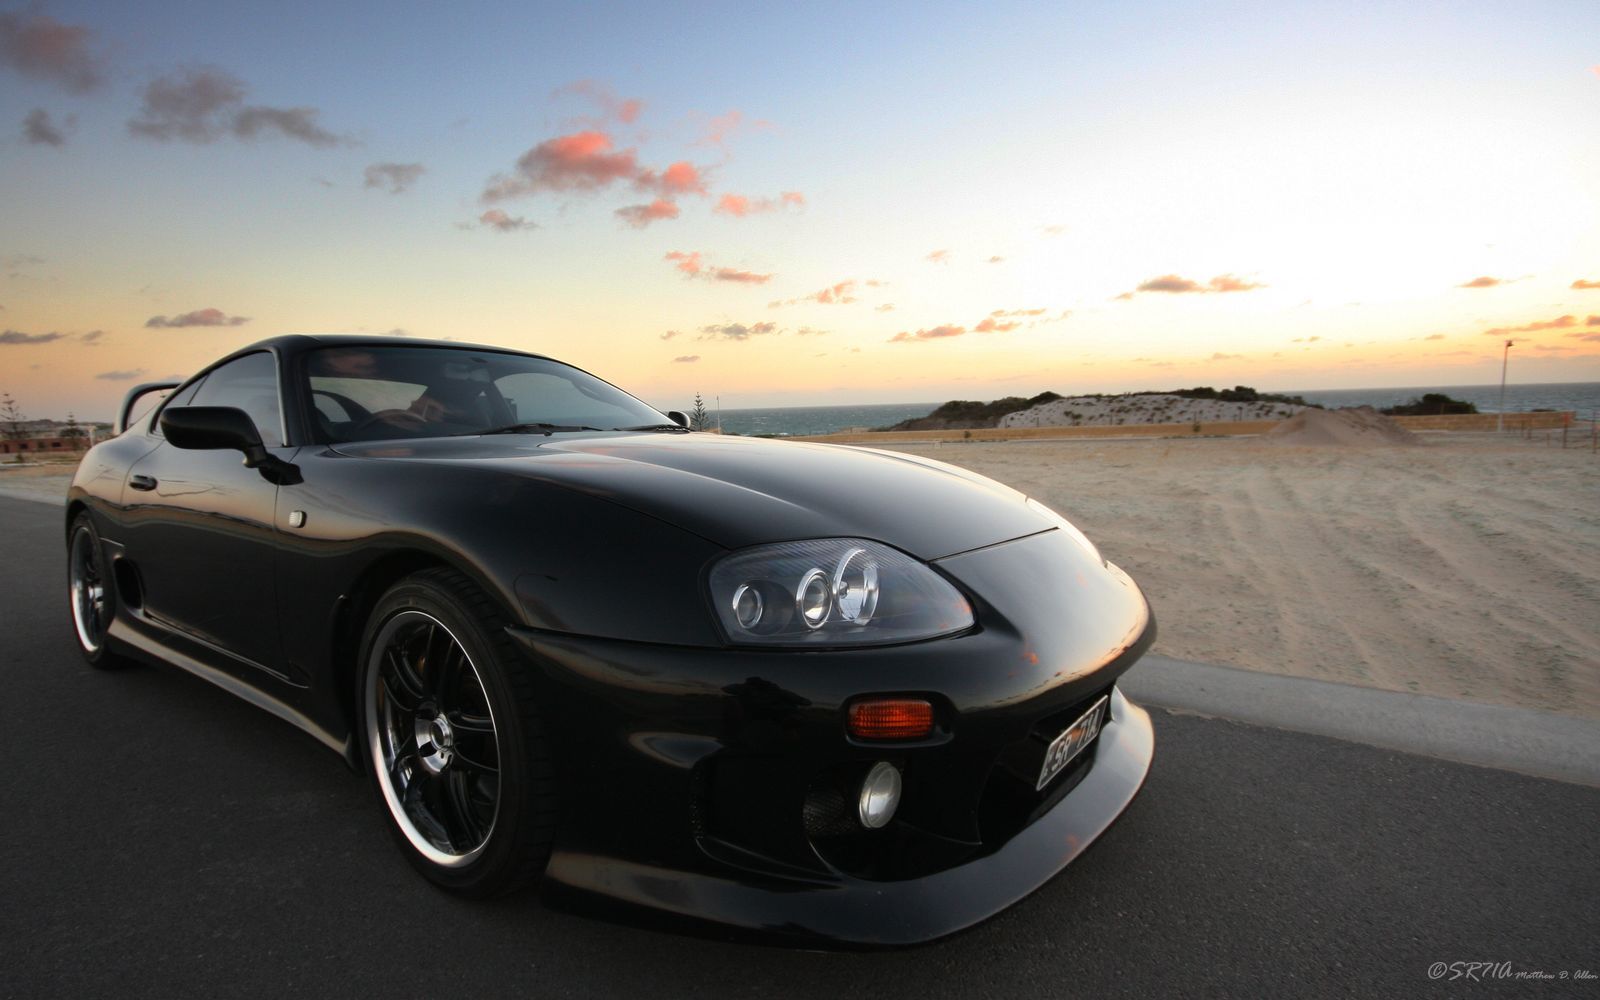 Toyota Supra Wallpapers 4084 Hd Wallpapers | Cars Background ...